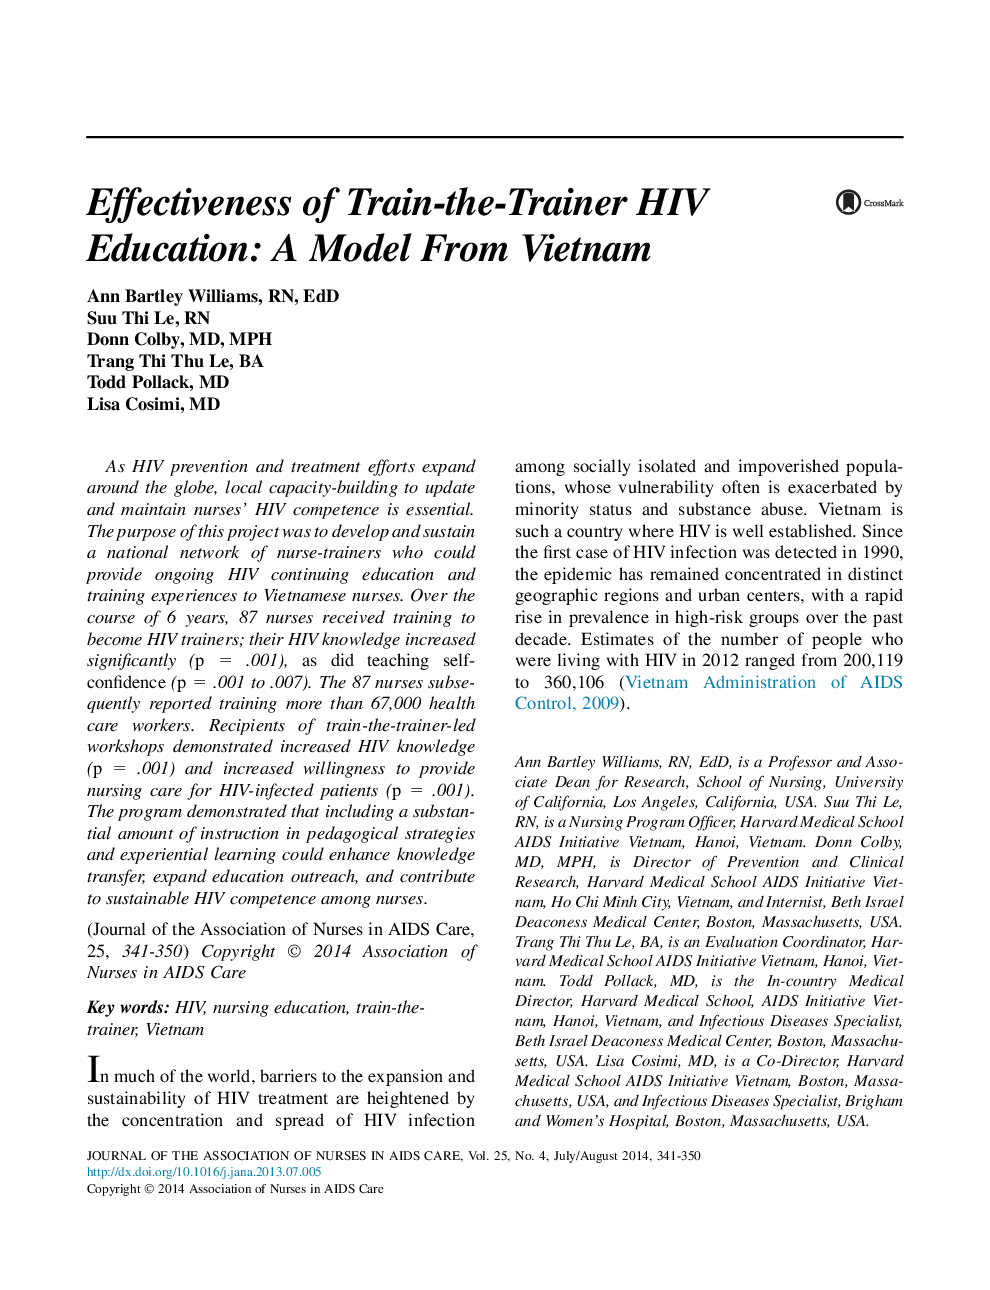 Effectiveness of Train-the-Trainer HIV Education: A Model From Vietnam